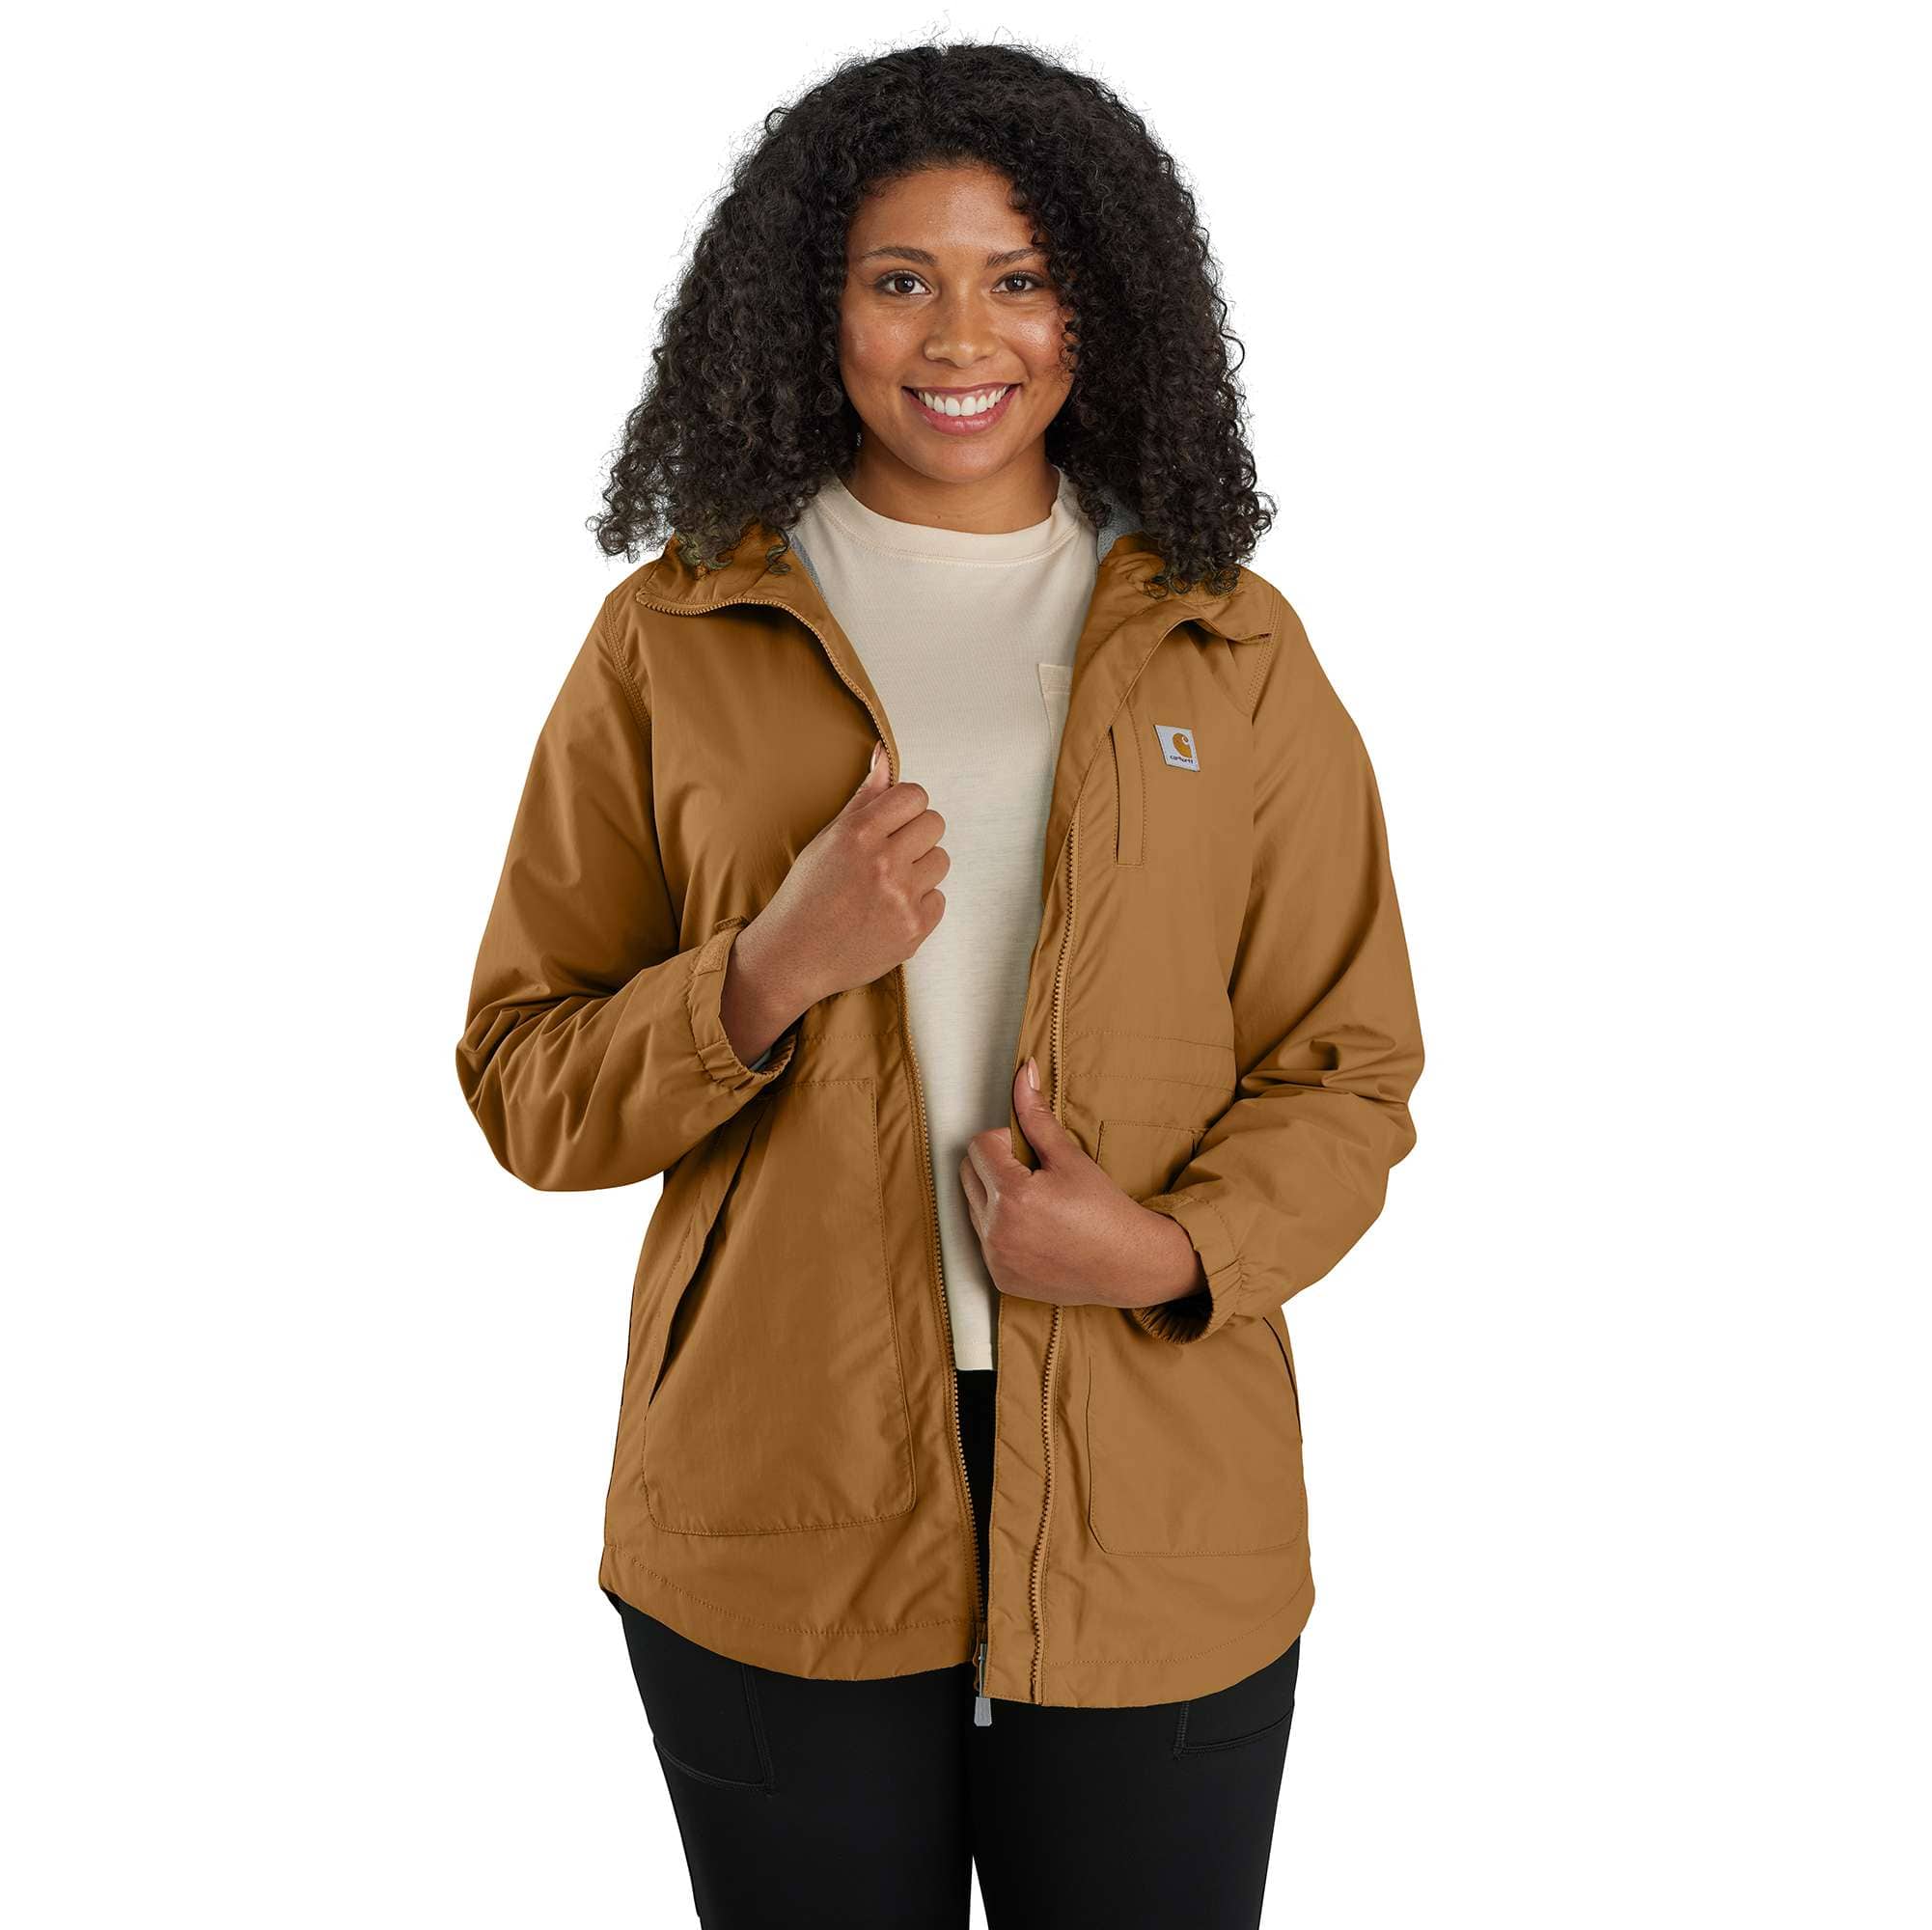 Carhartt Women's Crawford Bomber Jacket - Traditions Clothing